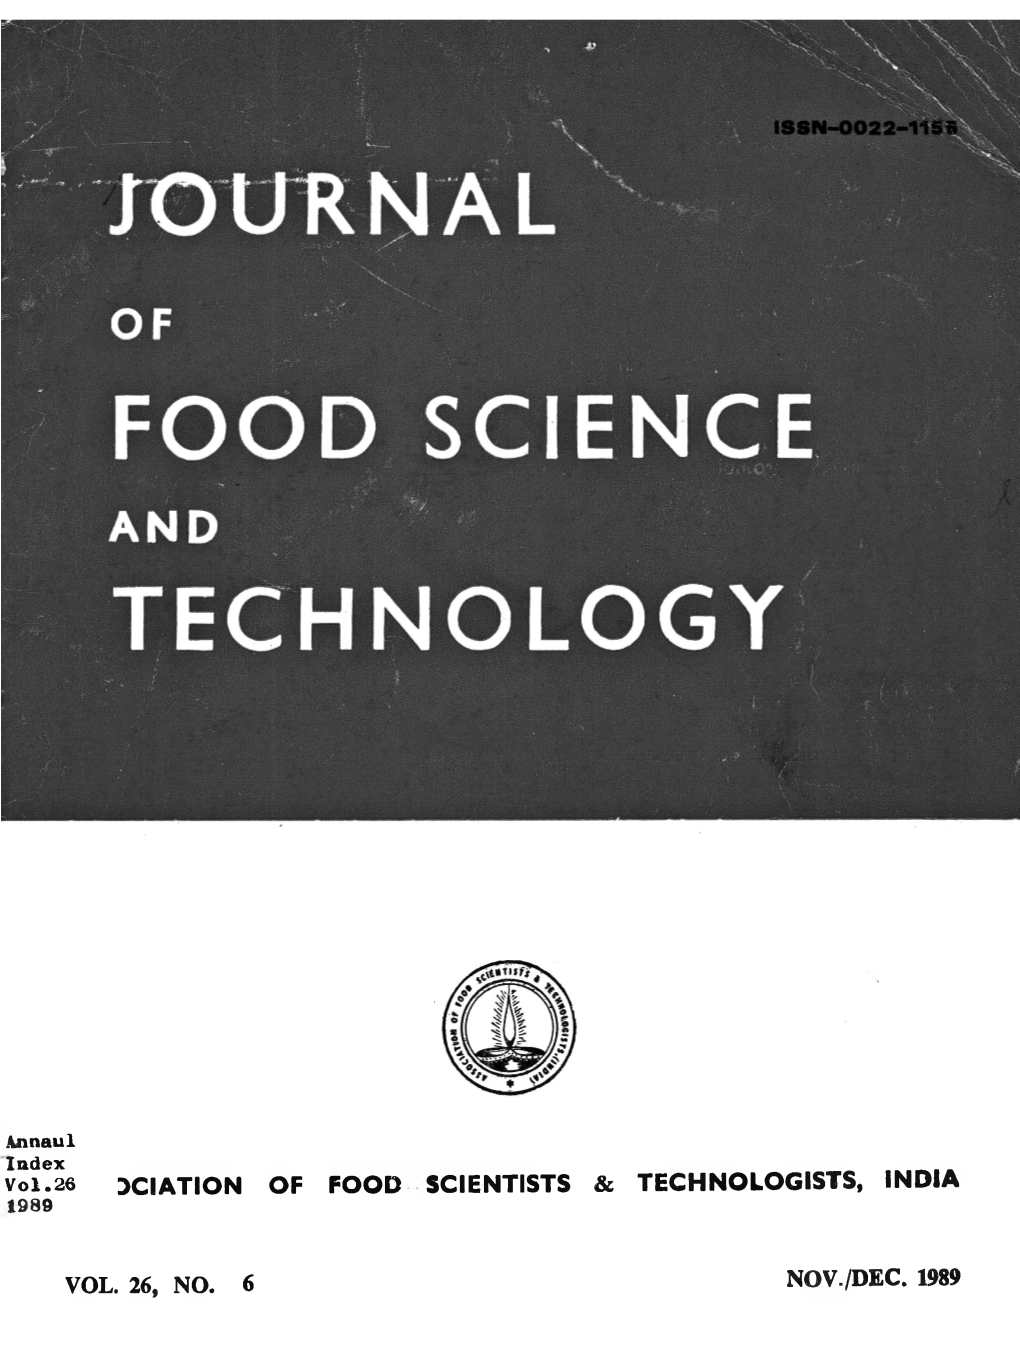 Journal of Food Science and Technology 1989 Volume.26 No.6